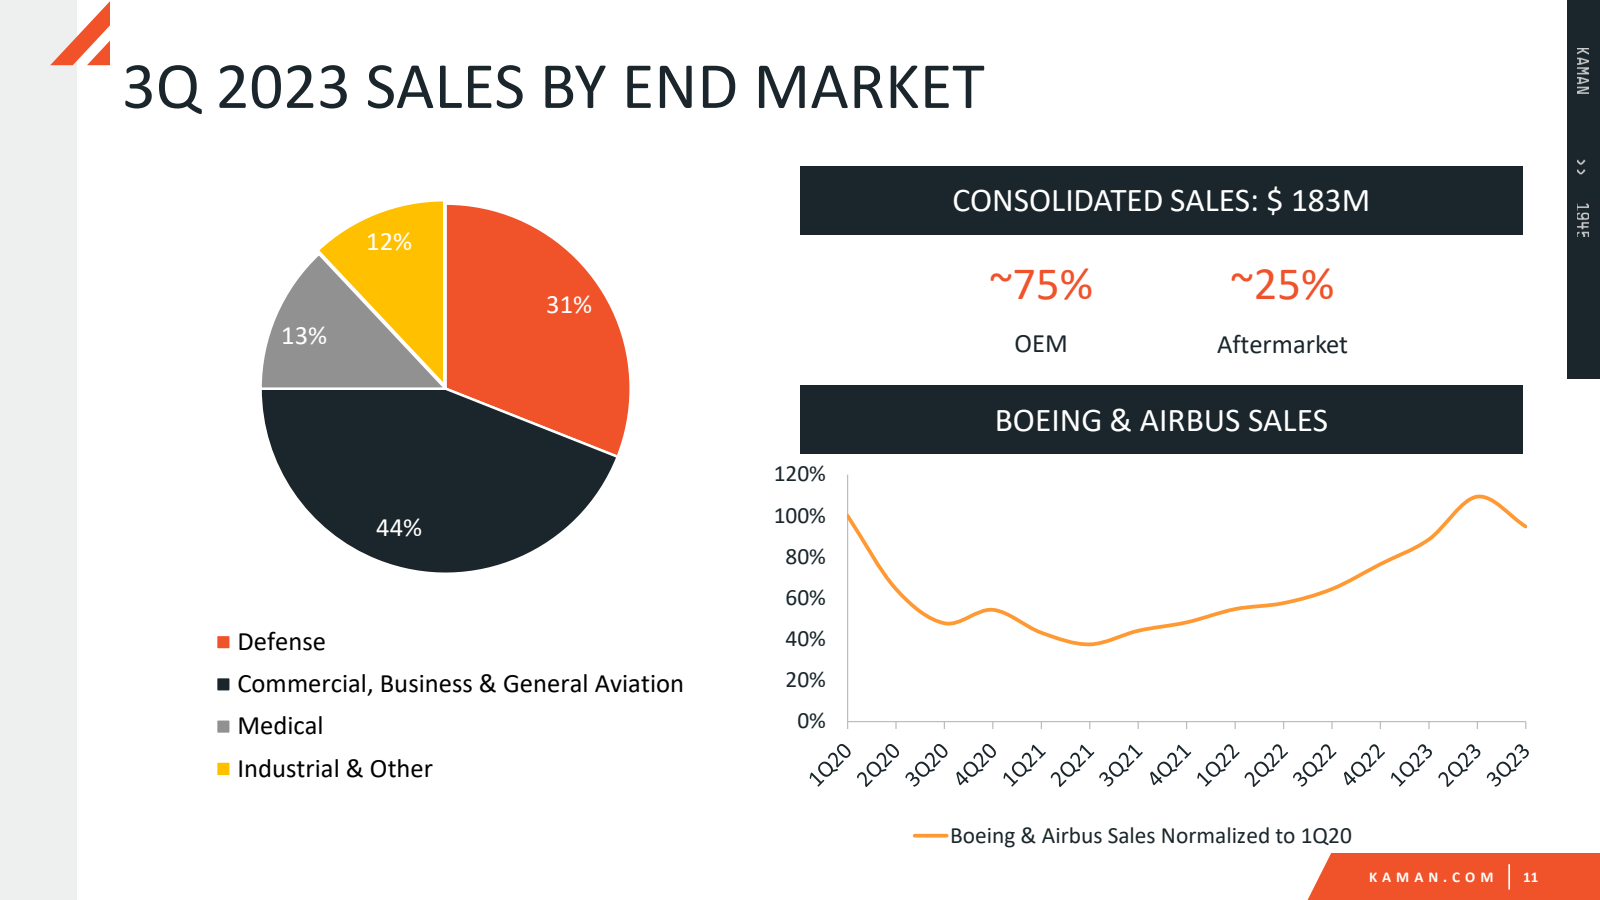 3Q 2023 SALES BY END